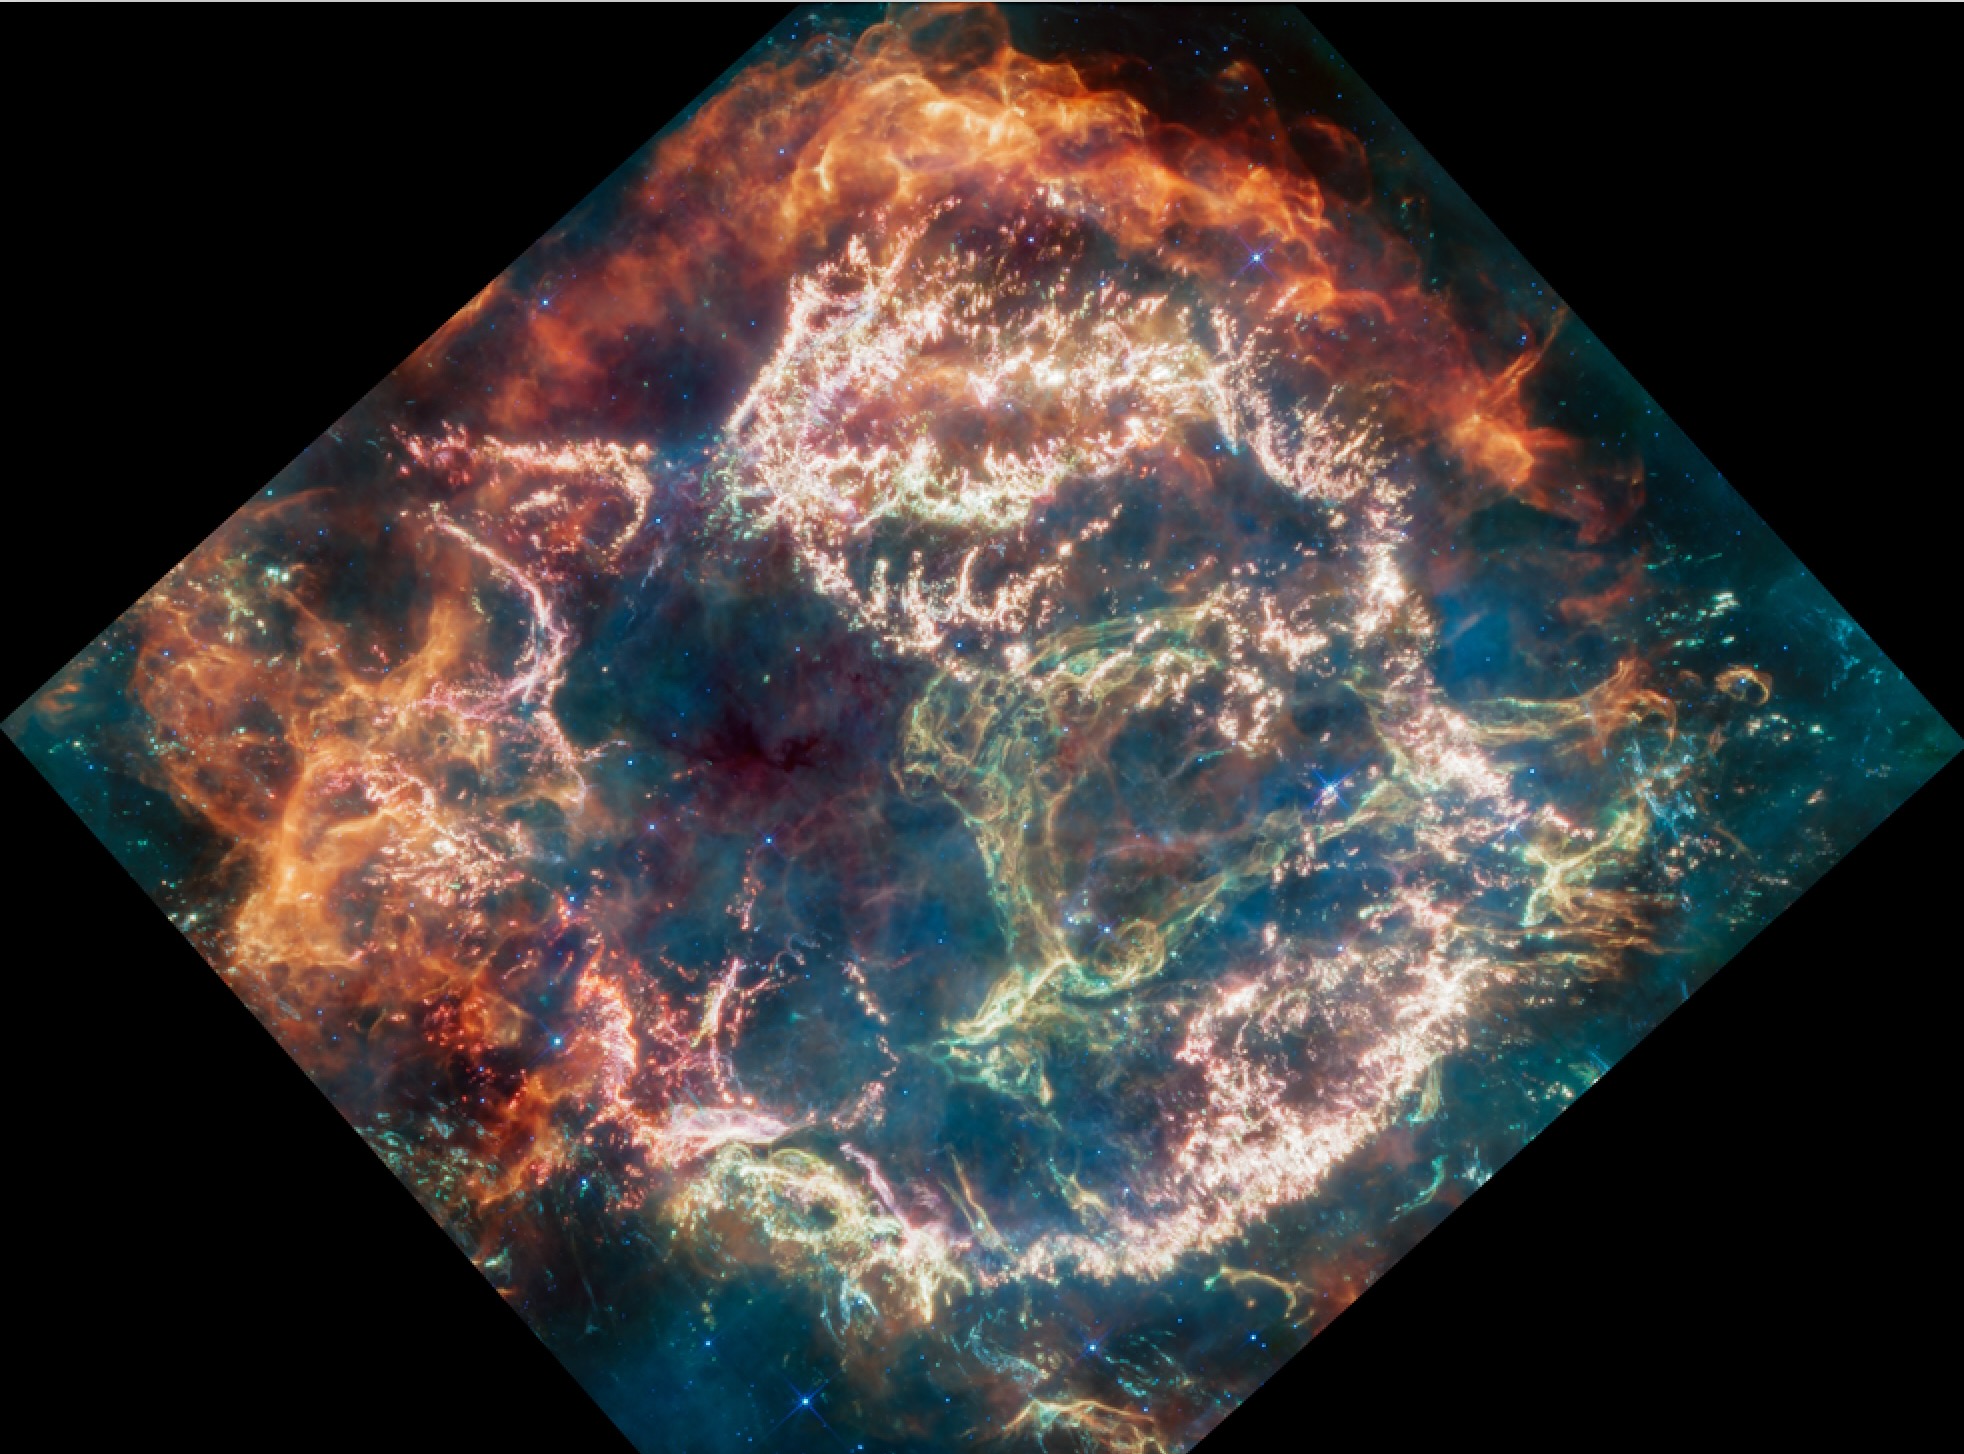 a diamond-shaped image showing multicolored tendrils of a supernova remnant seen in a telescope